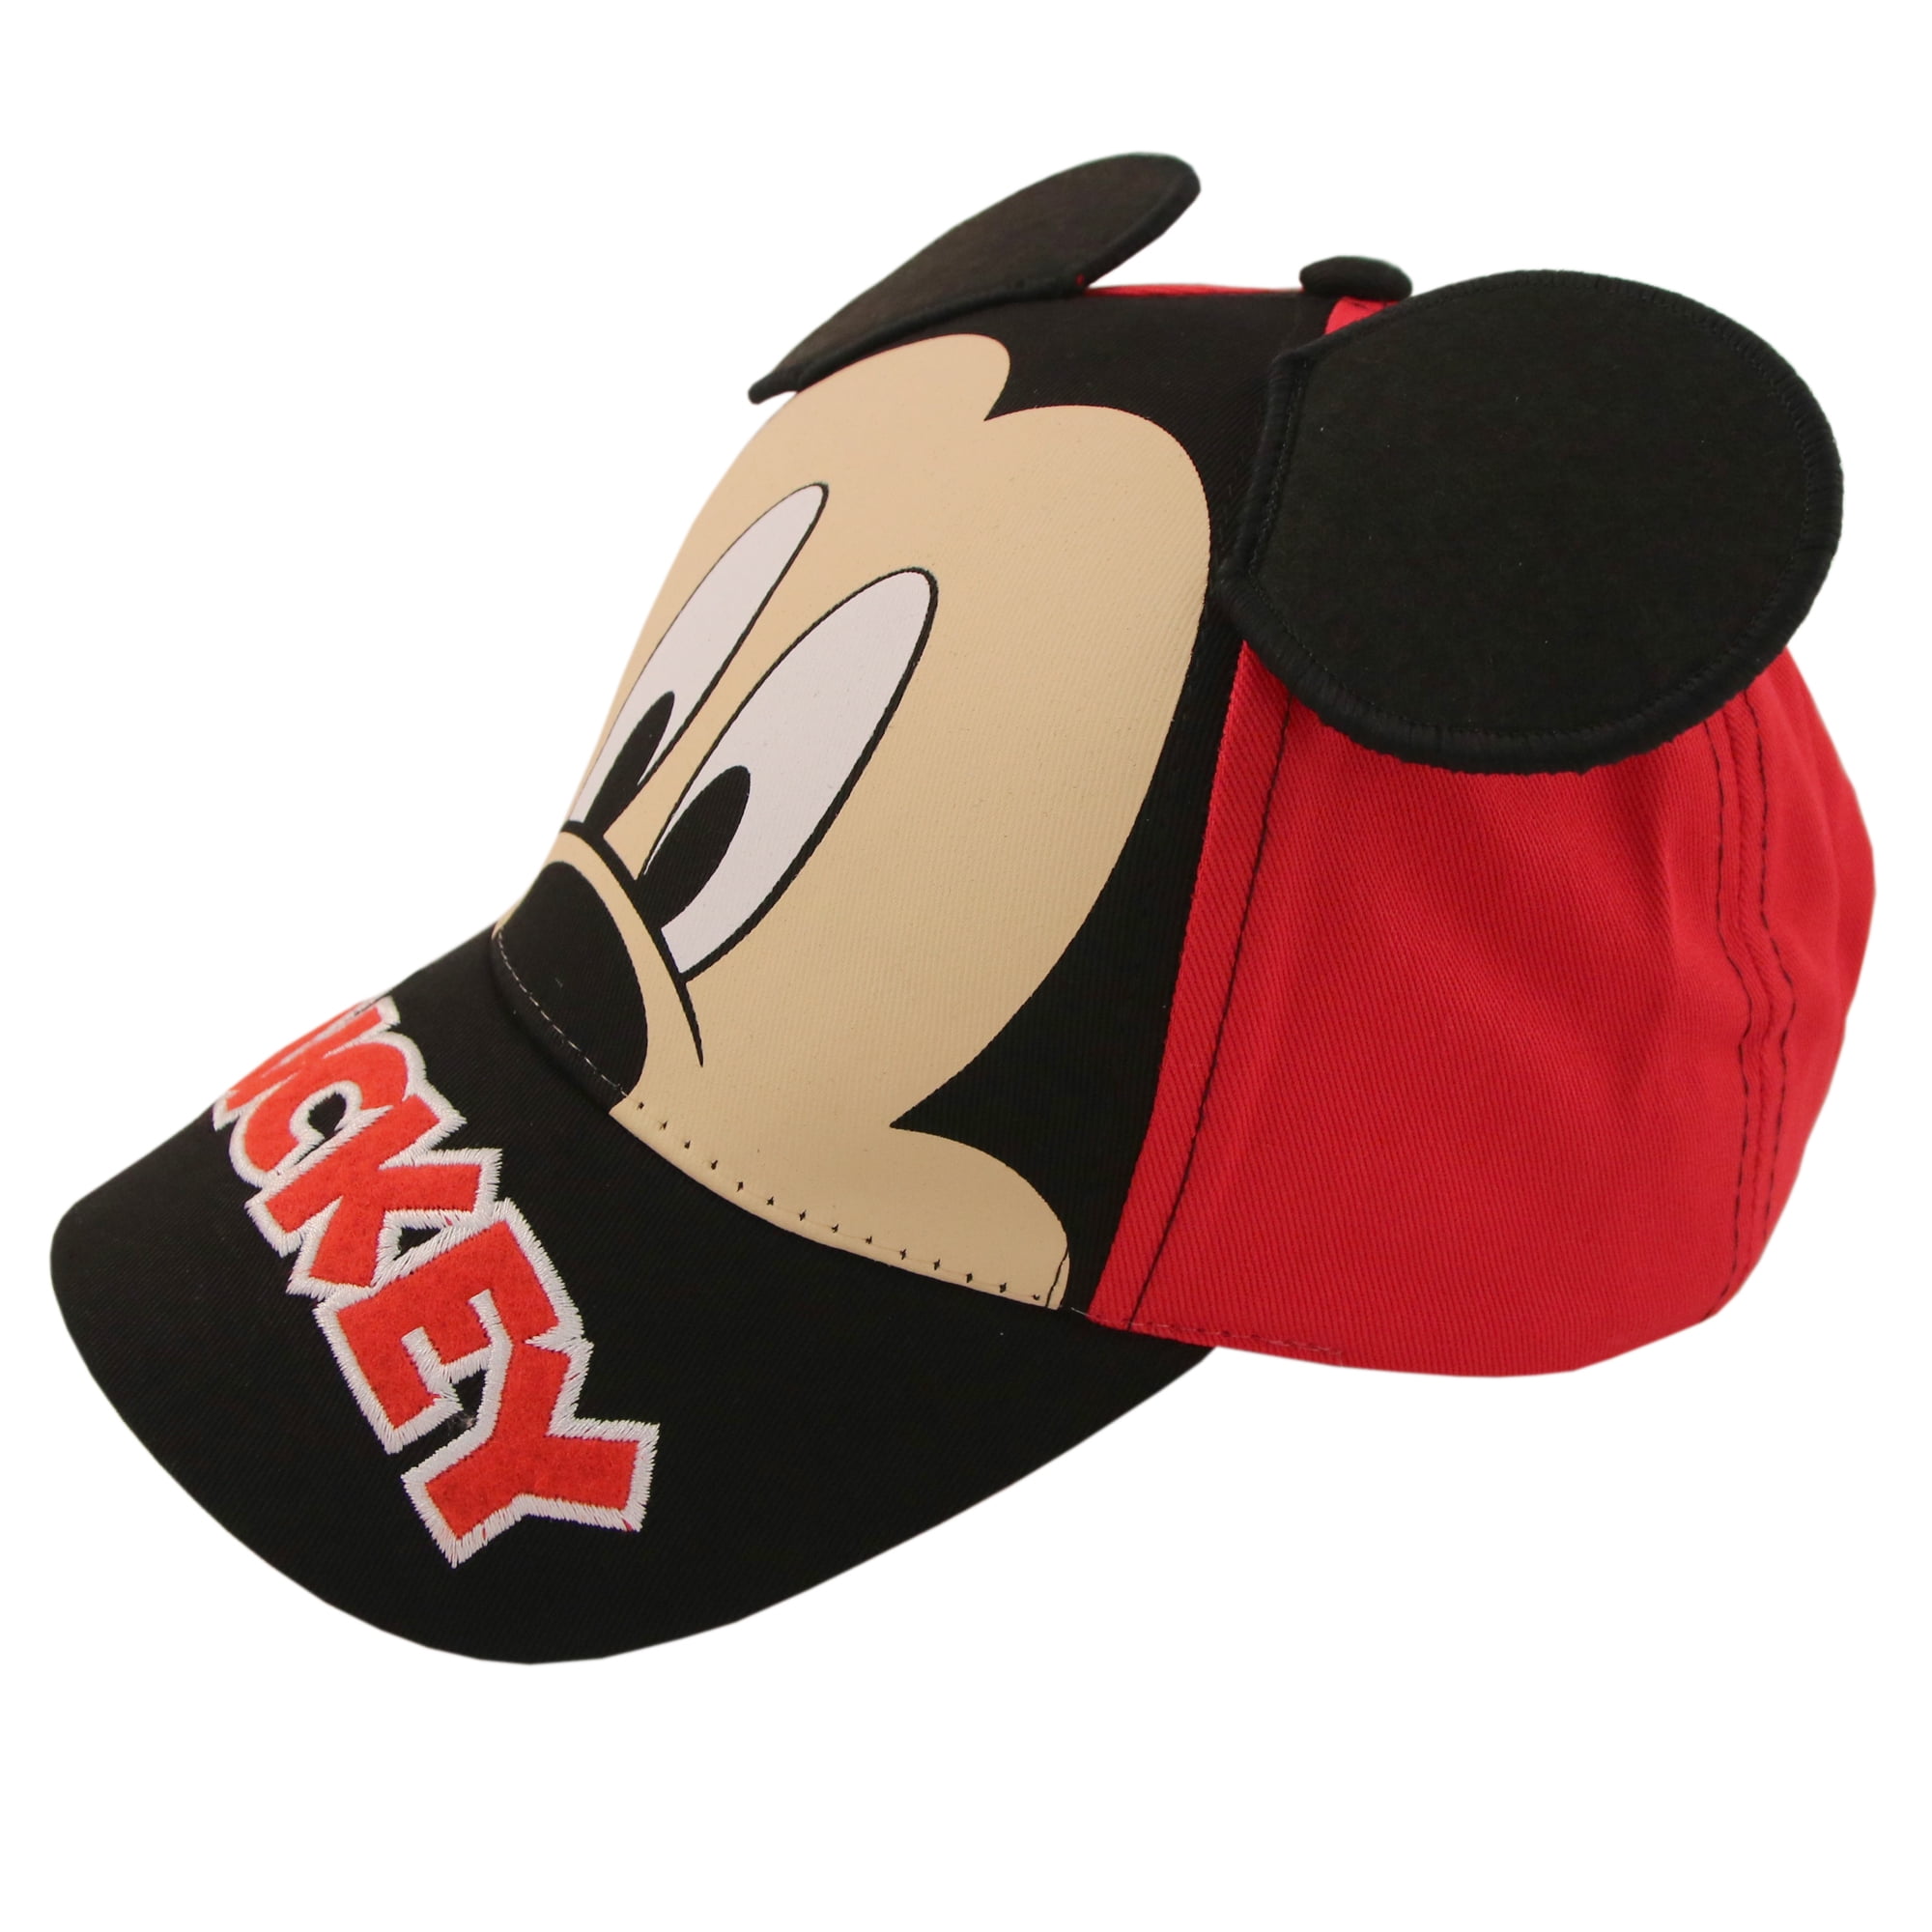 Details about   Disney Mickey Mouse Boys Baseball Cap Adjustable Hat Toddler 2 Kids Gift 